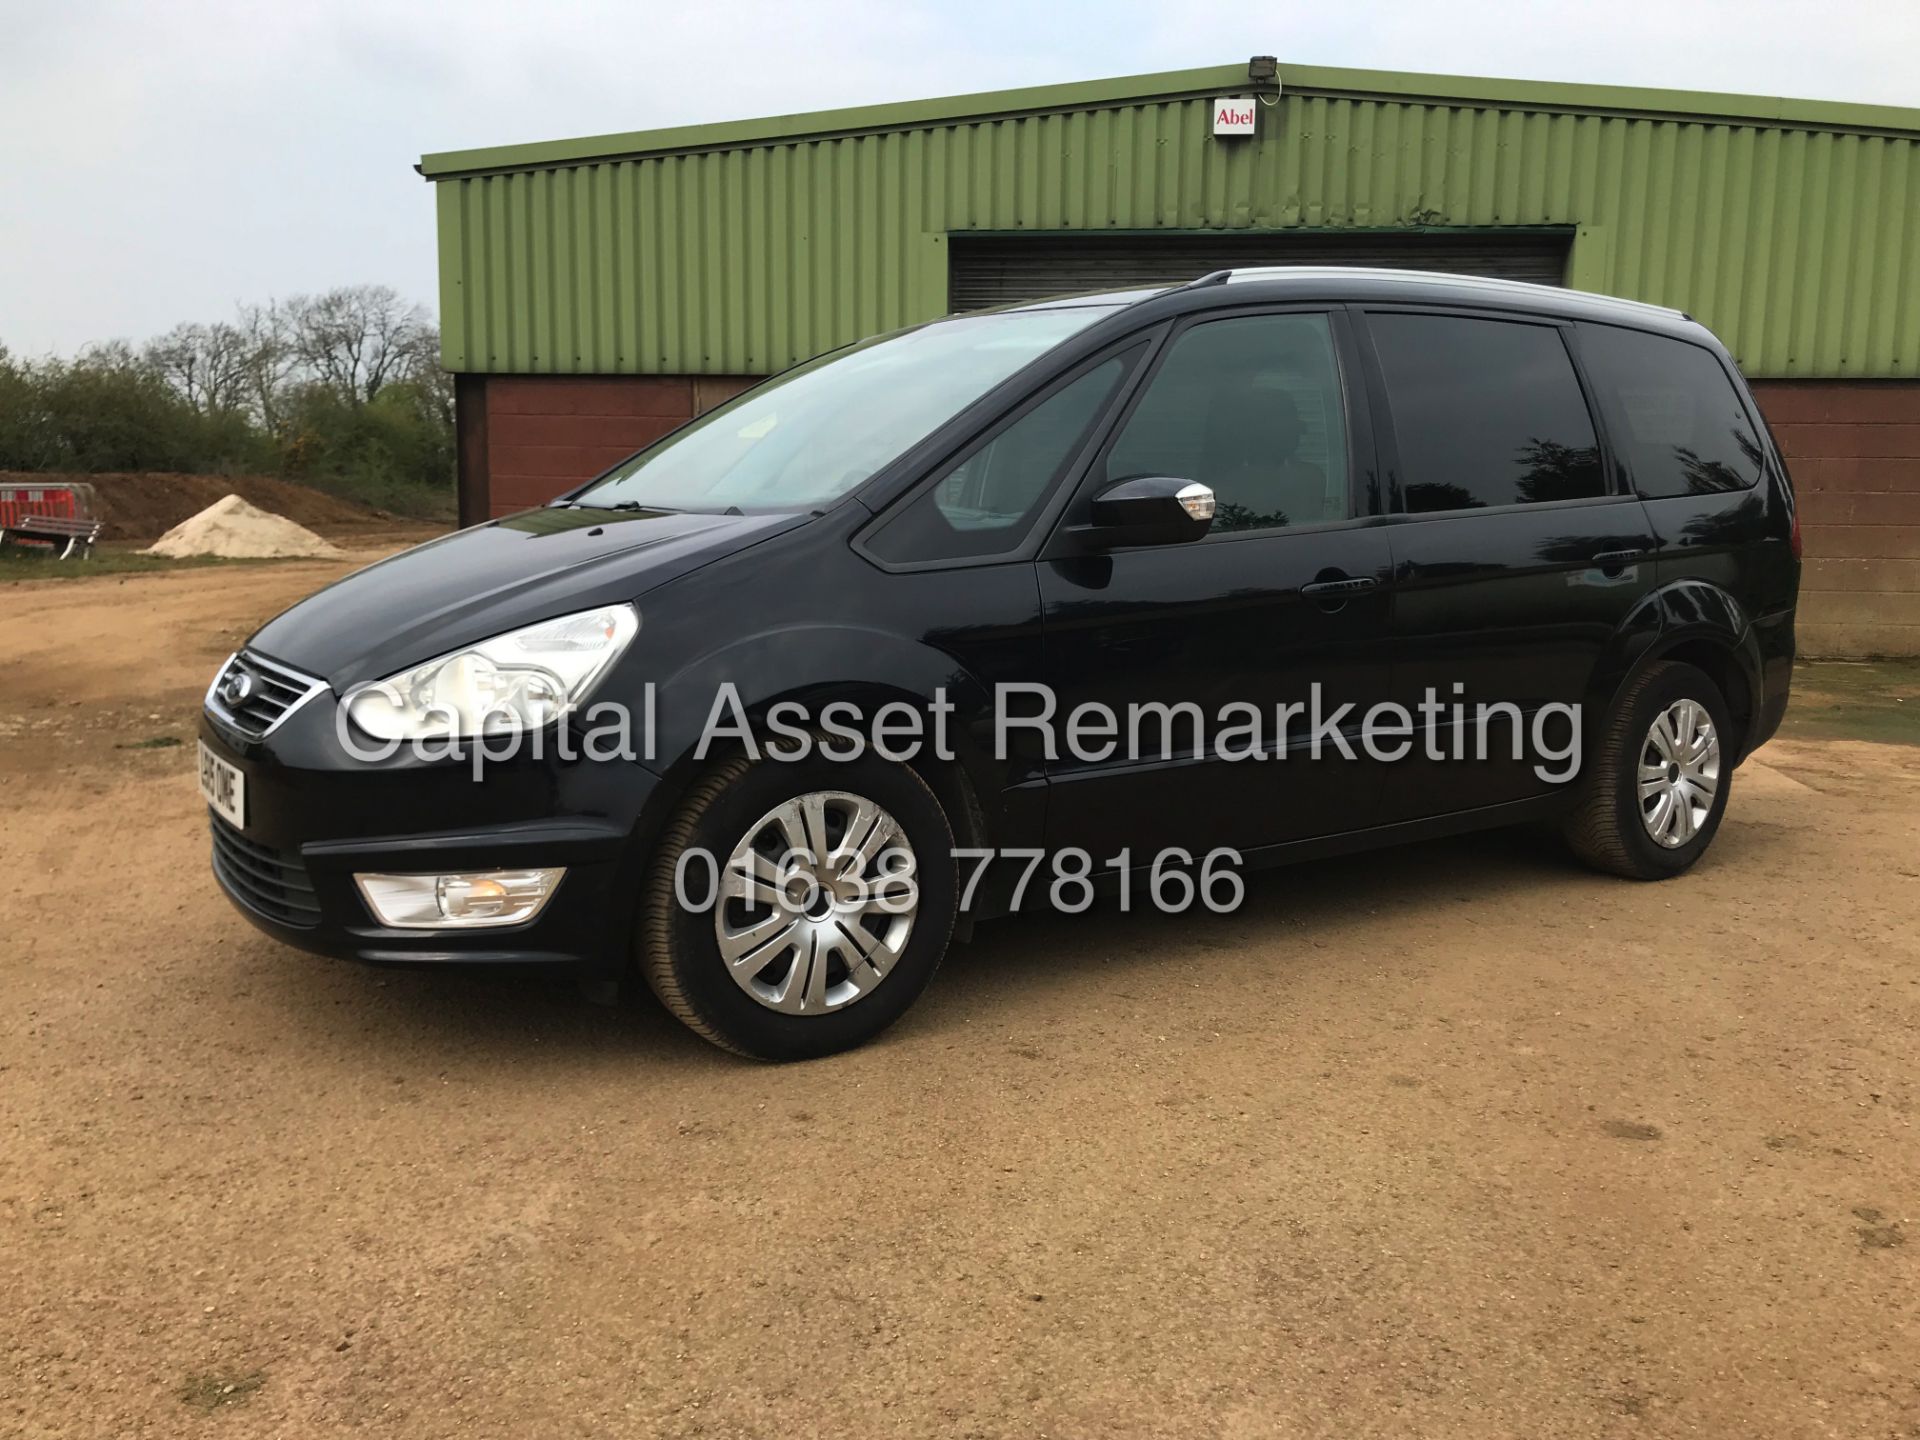 FORD GALAXY 2.0 TDCI "POWER-SHIFT / ZETEC" 7 SEATER (15 REG - NEW SHAPE) 1 OWNER - 140BHP - AIR CON - Image 7 of 22